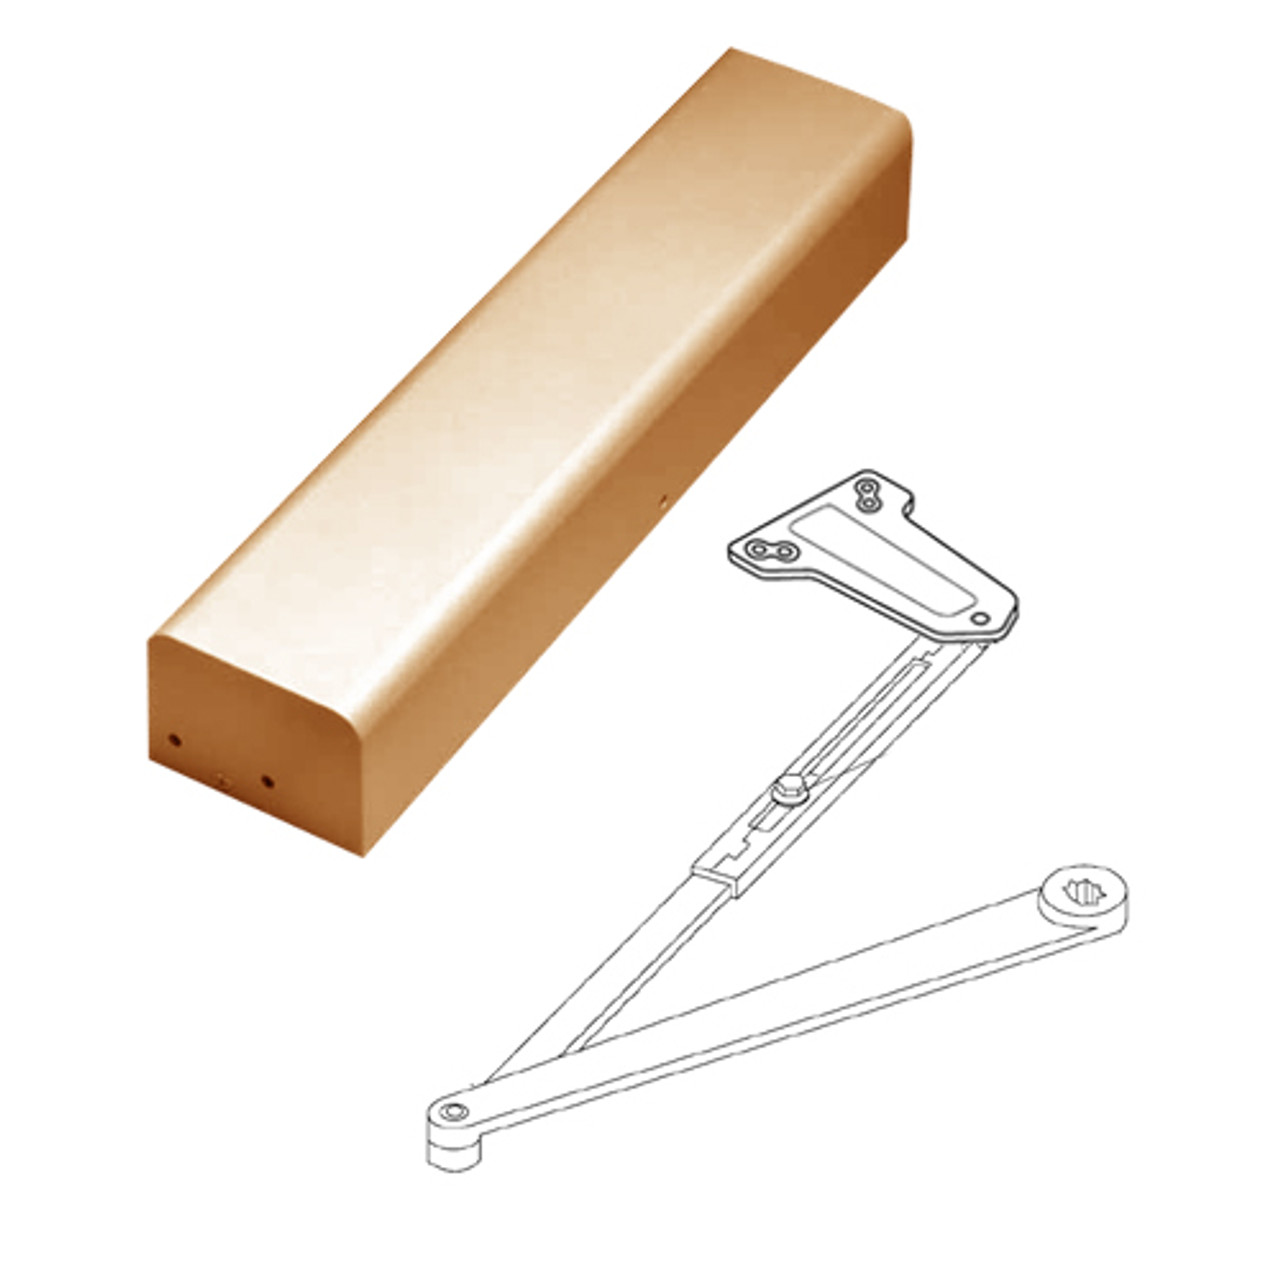 PA3581-691 Yale 3000 Series Architectural Door Closer with Parallel Low Profile Arm in Light Bronze